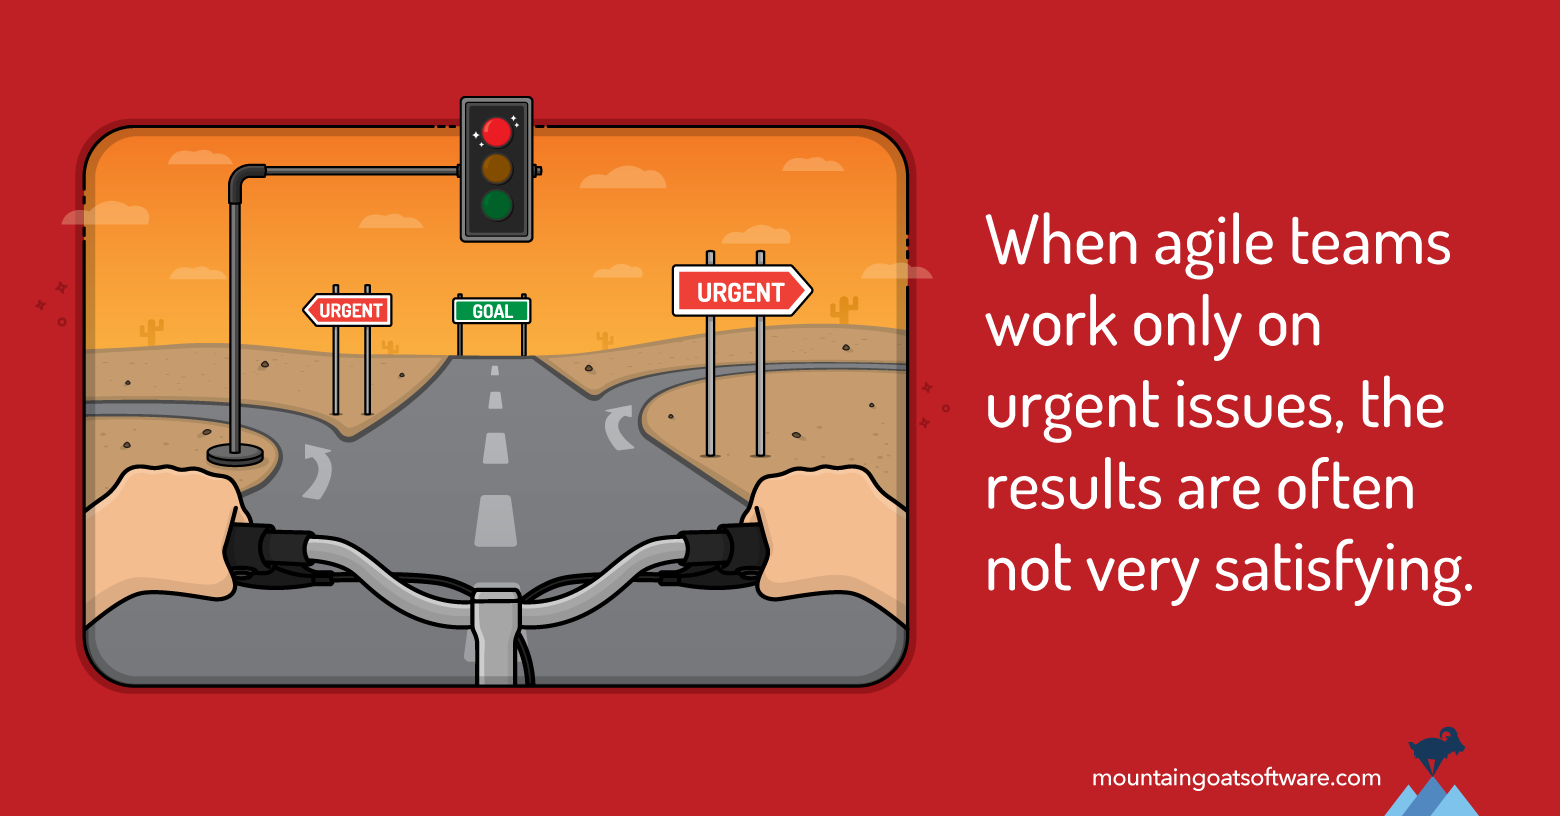 When agile teams work only on urgent issues, the results are not very satisfying